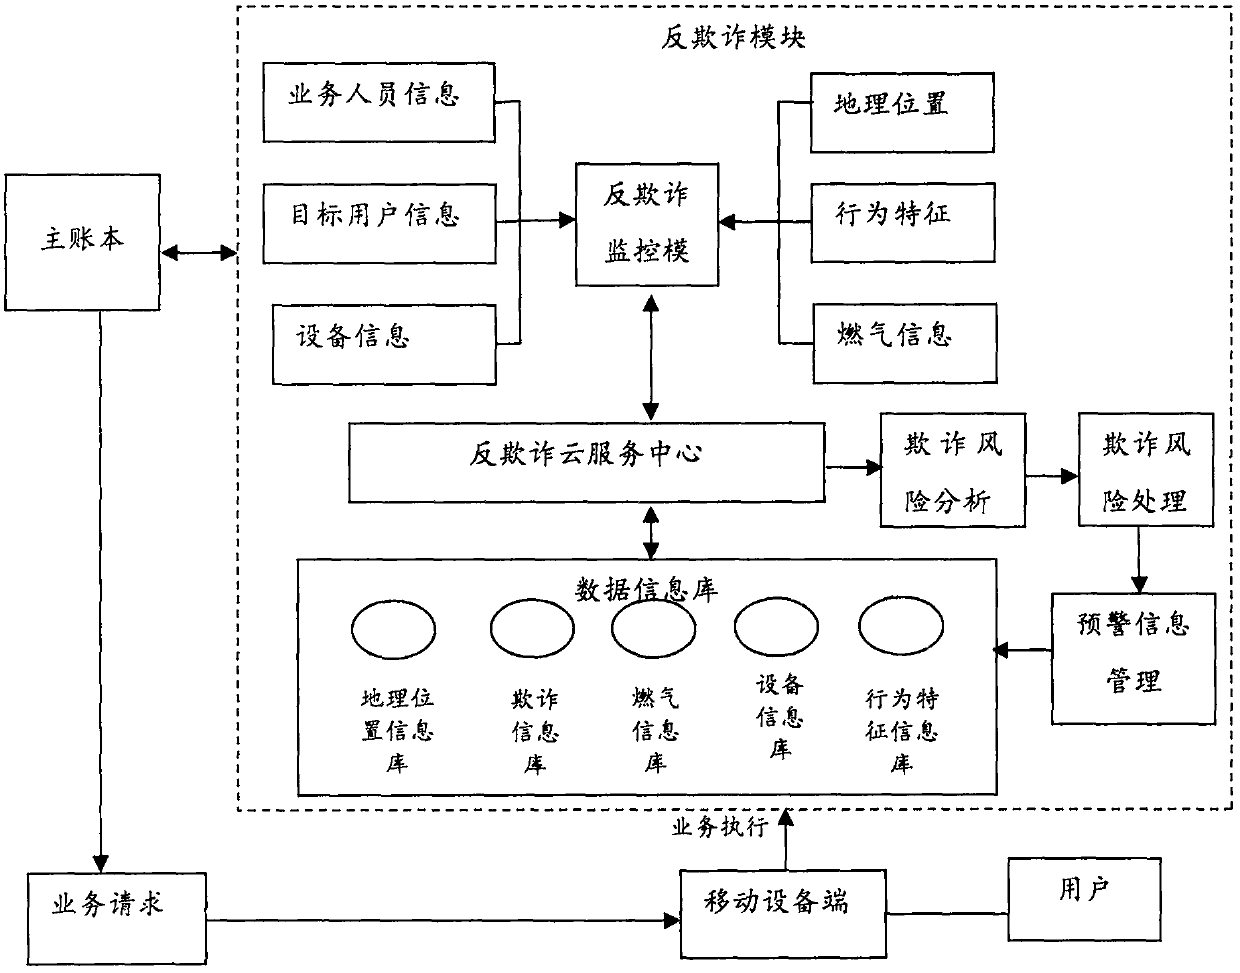 Anti-fraud system and method for account book based on Internet of Things (IoT)